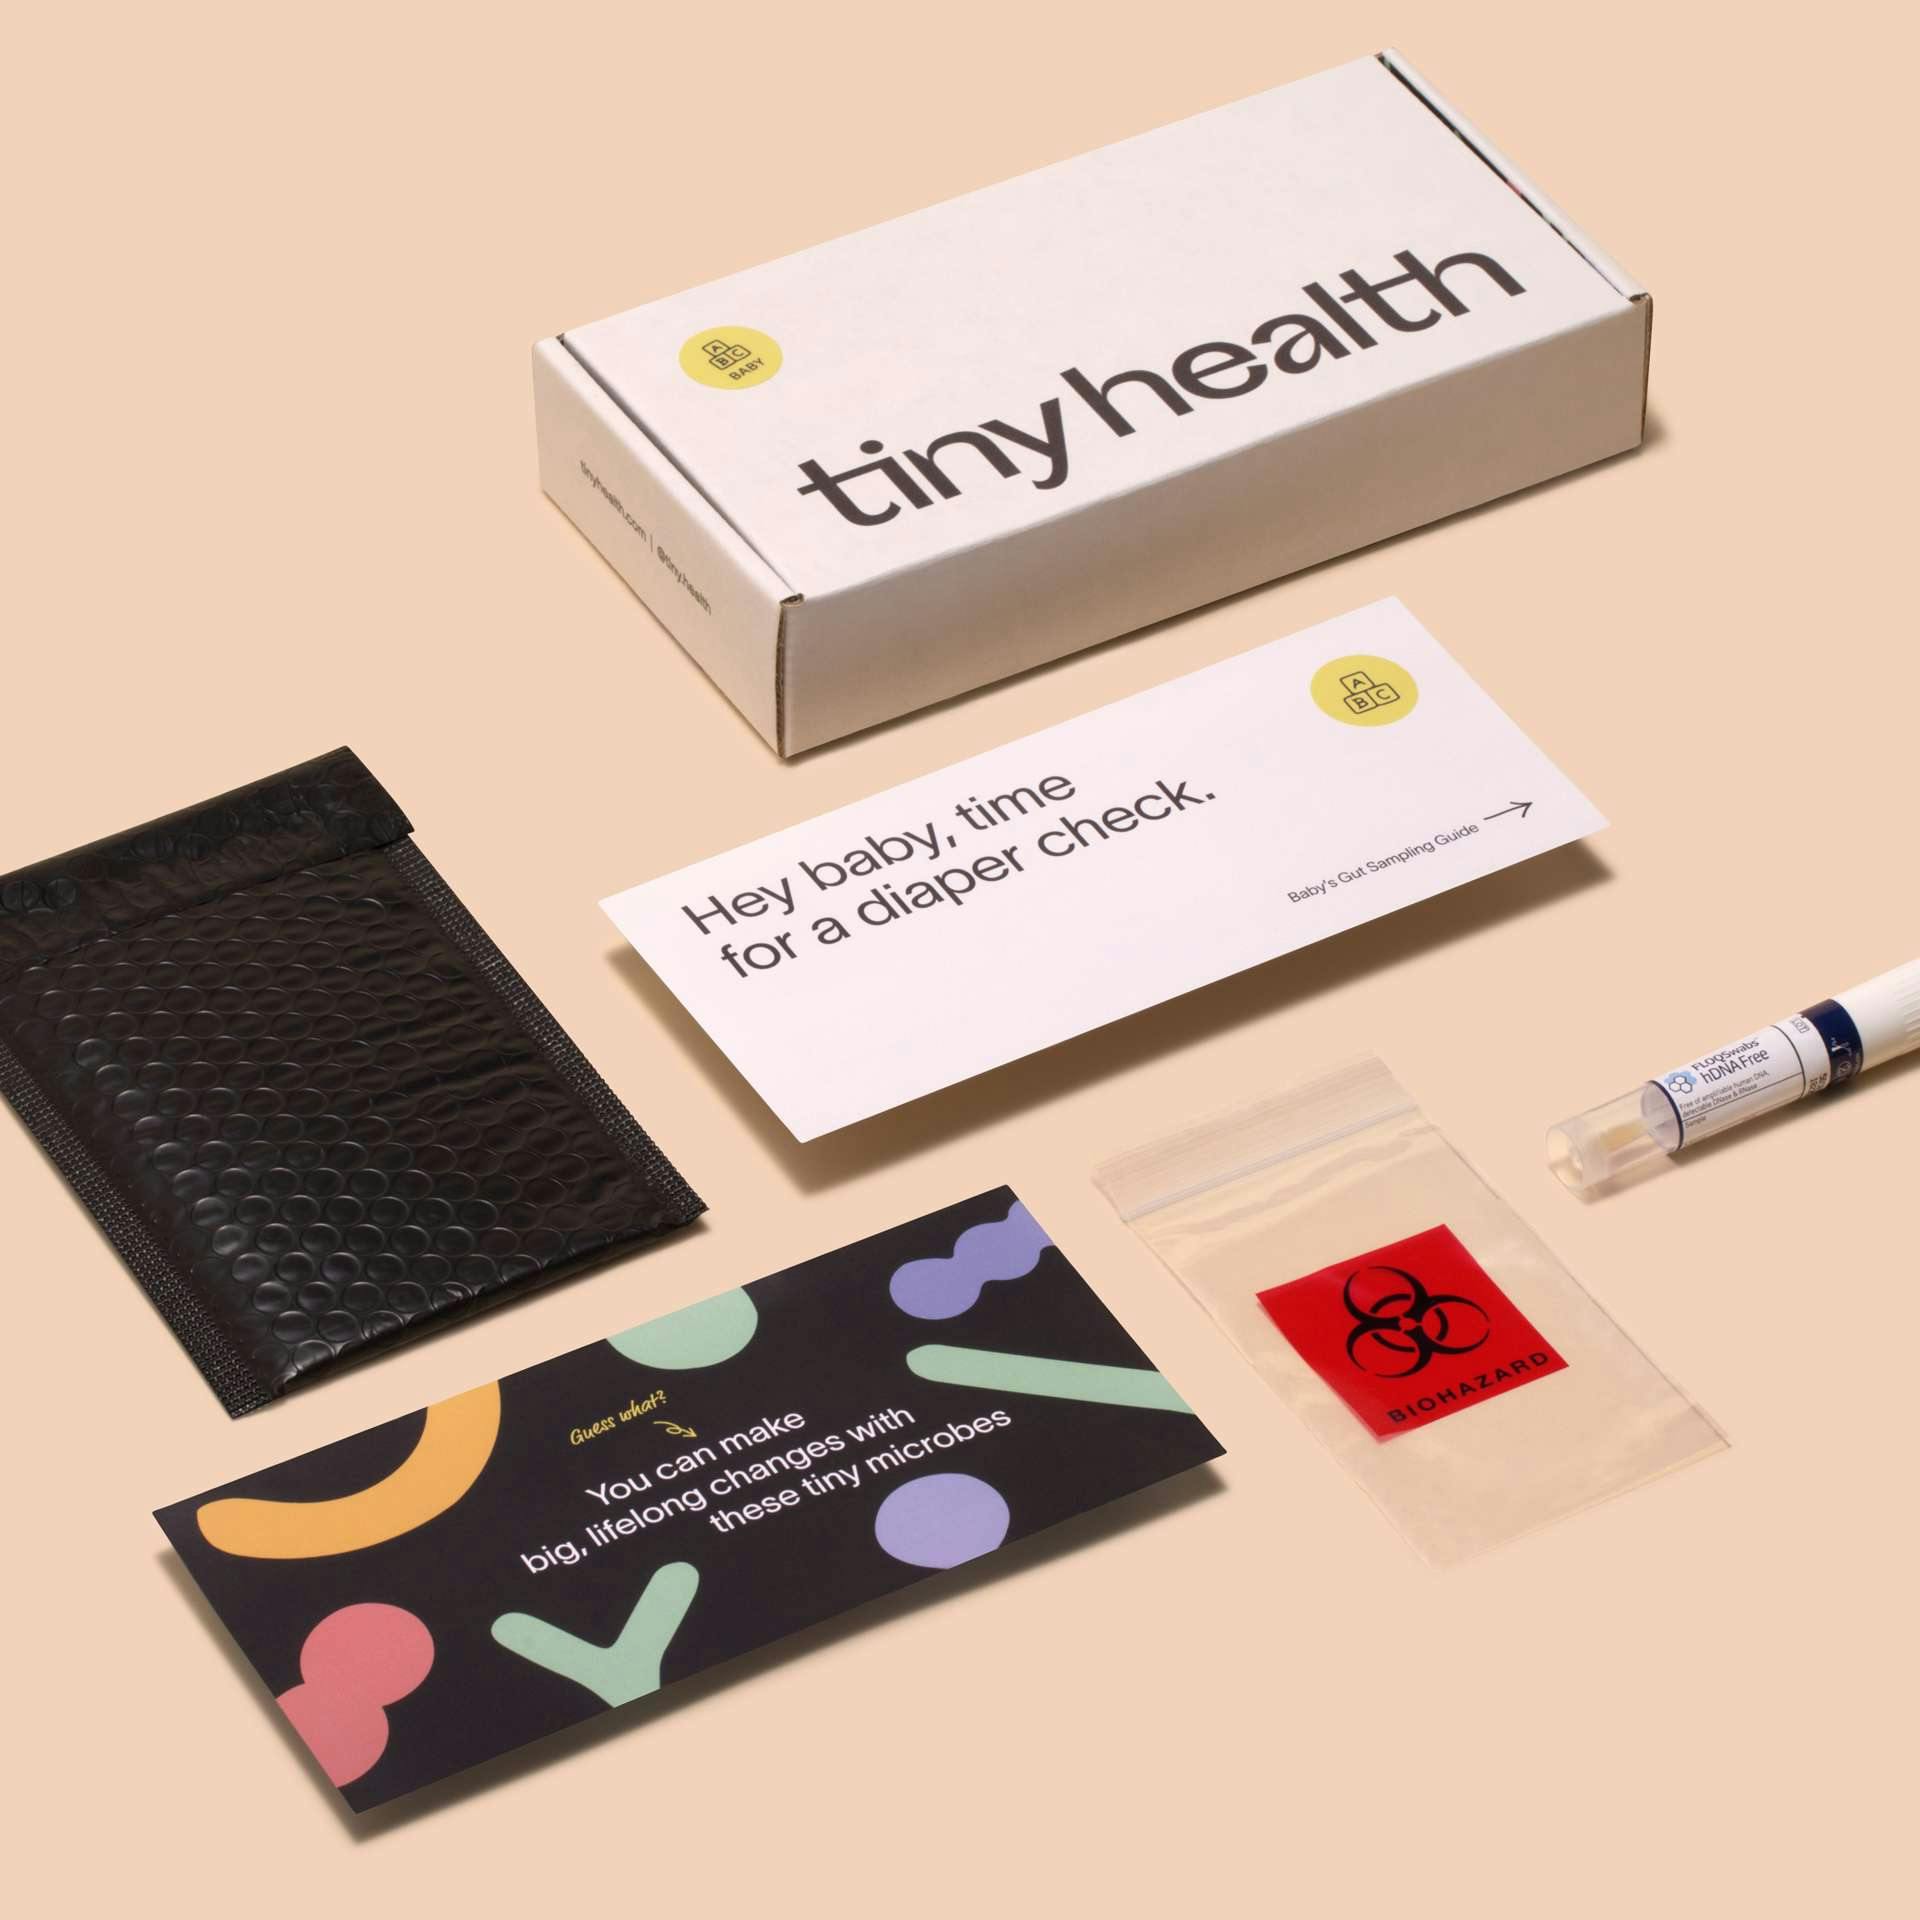 Tiny Health packaging with items inside